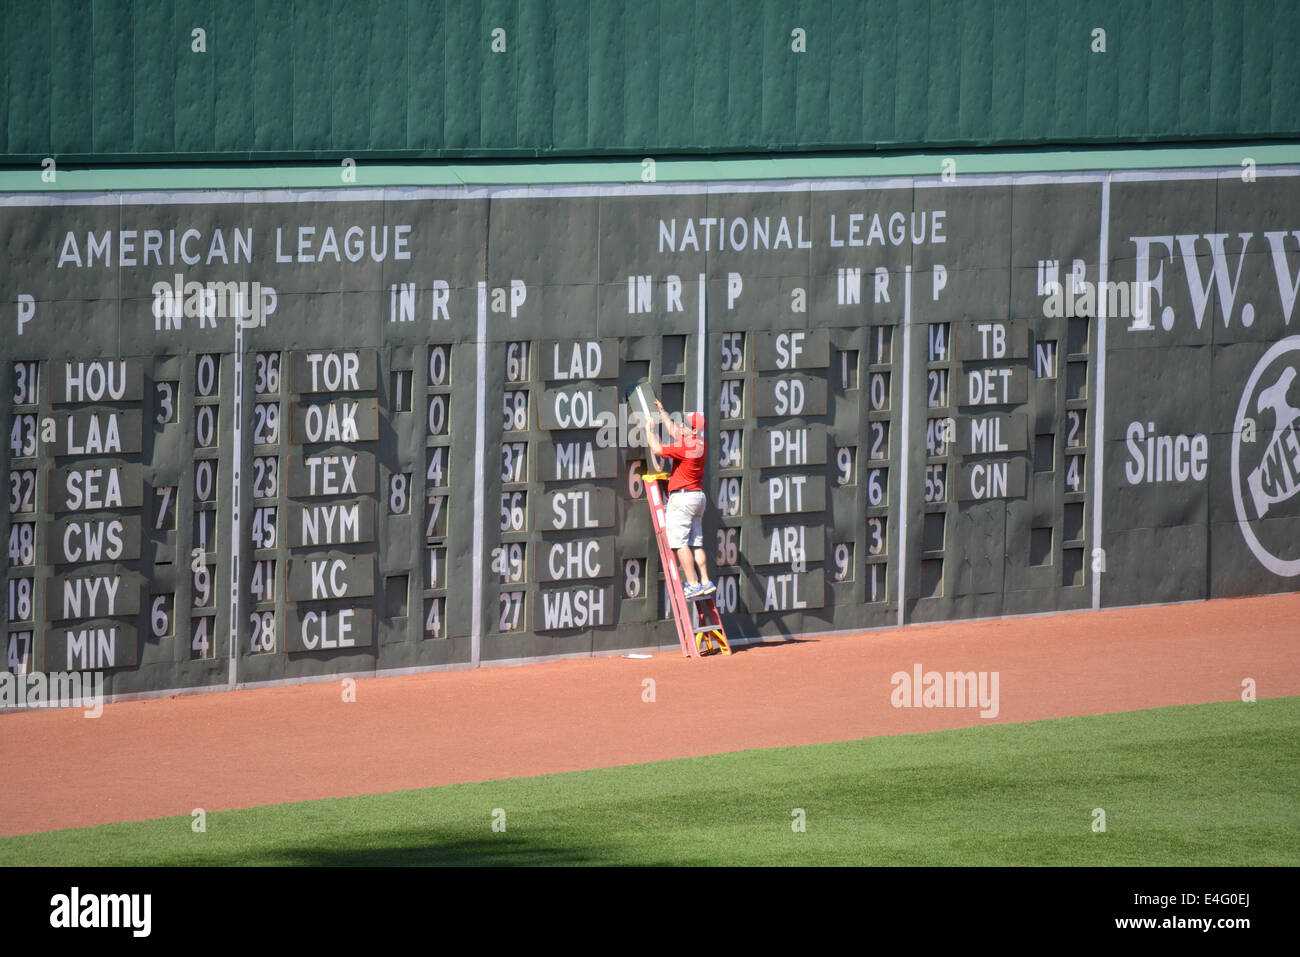 Boston Red Sox Fenway Park Replica Green Monster Outfield Wall 